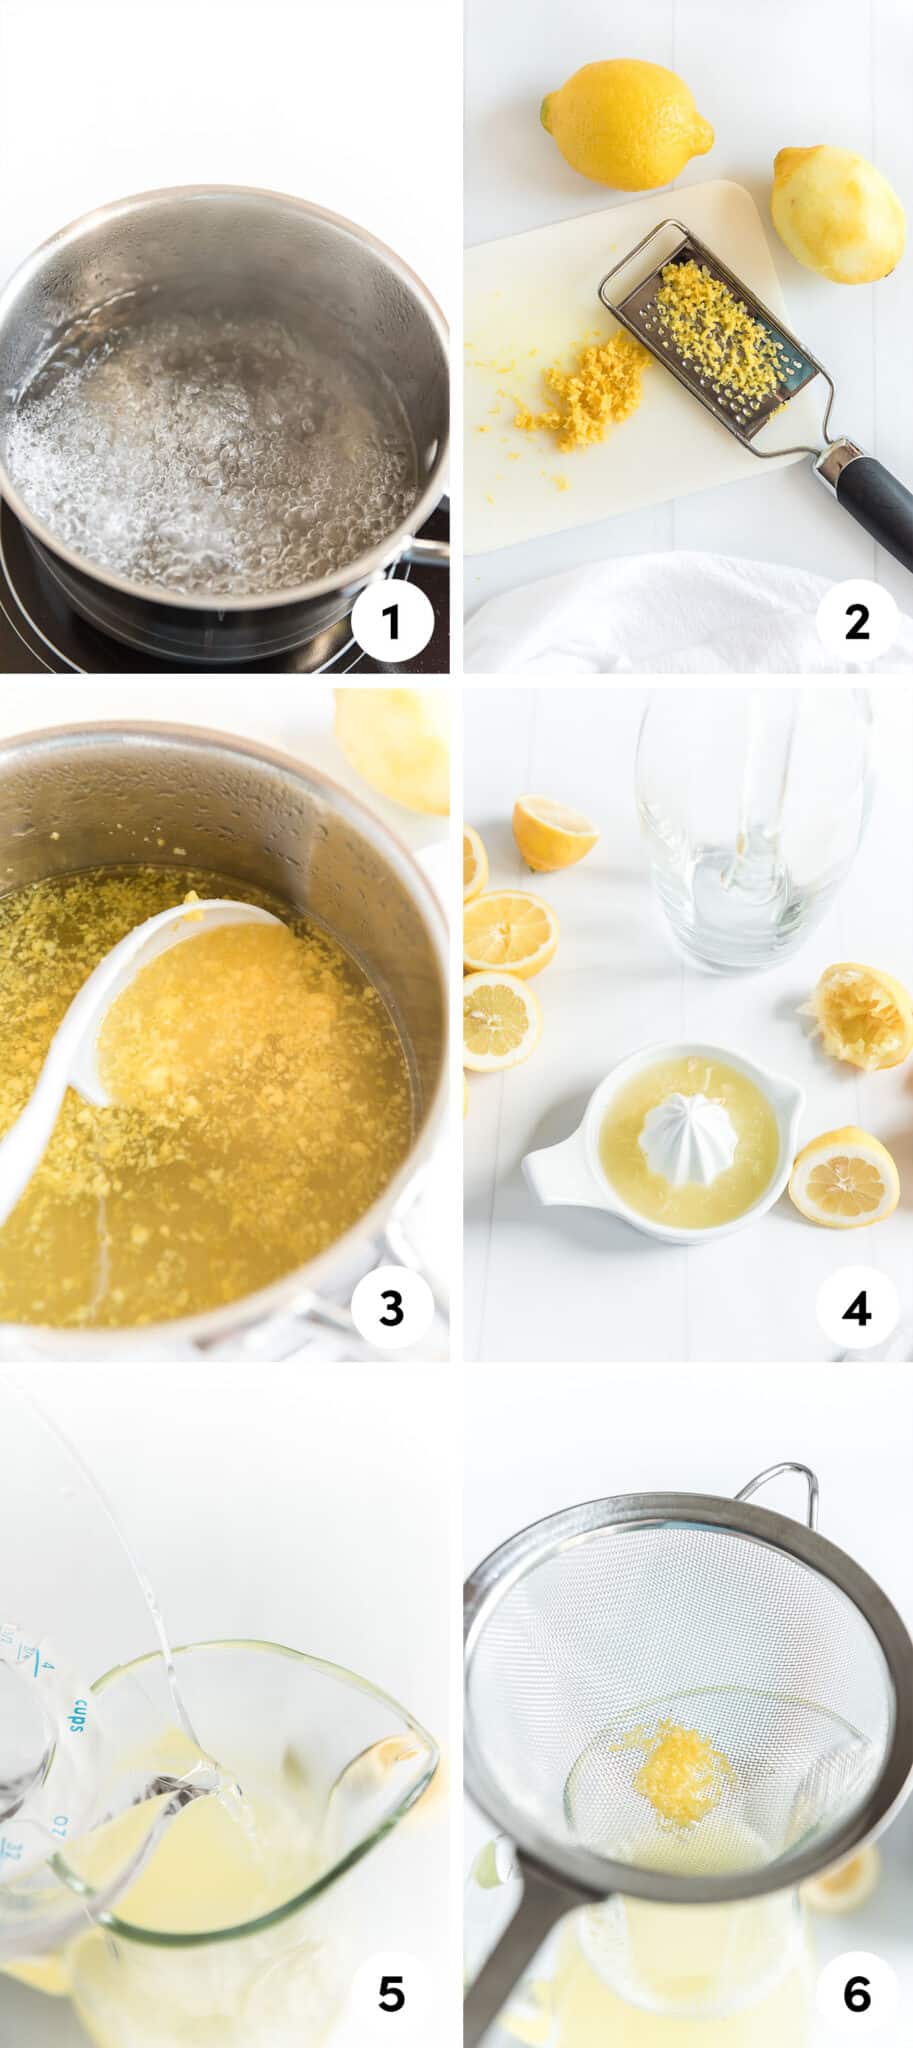 Step by step picture guide for the recipe. Picture 1 boiling water, picture 2 zesting lemon, picture 3 adding lemon zest to water, picture 4 juicing lemon, picture 5 adding lemon juice to pitcher, and picture 6 adding the cooled zest sugar water. 